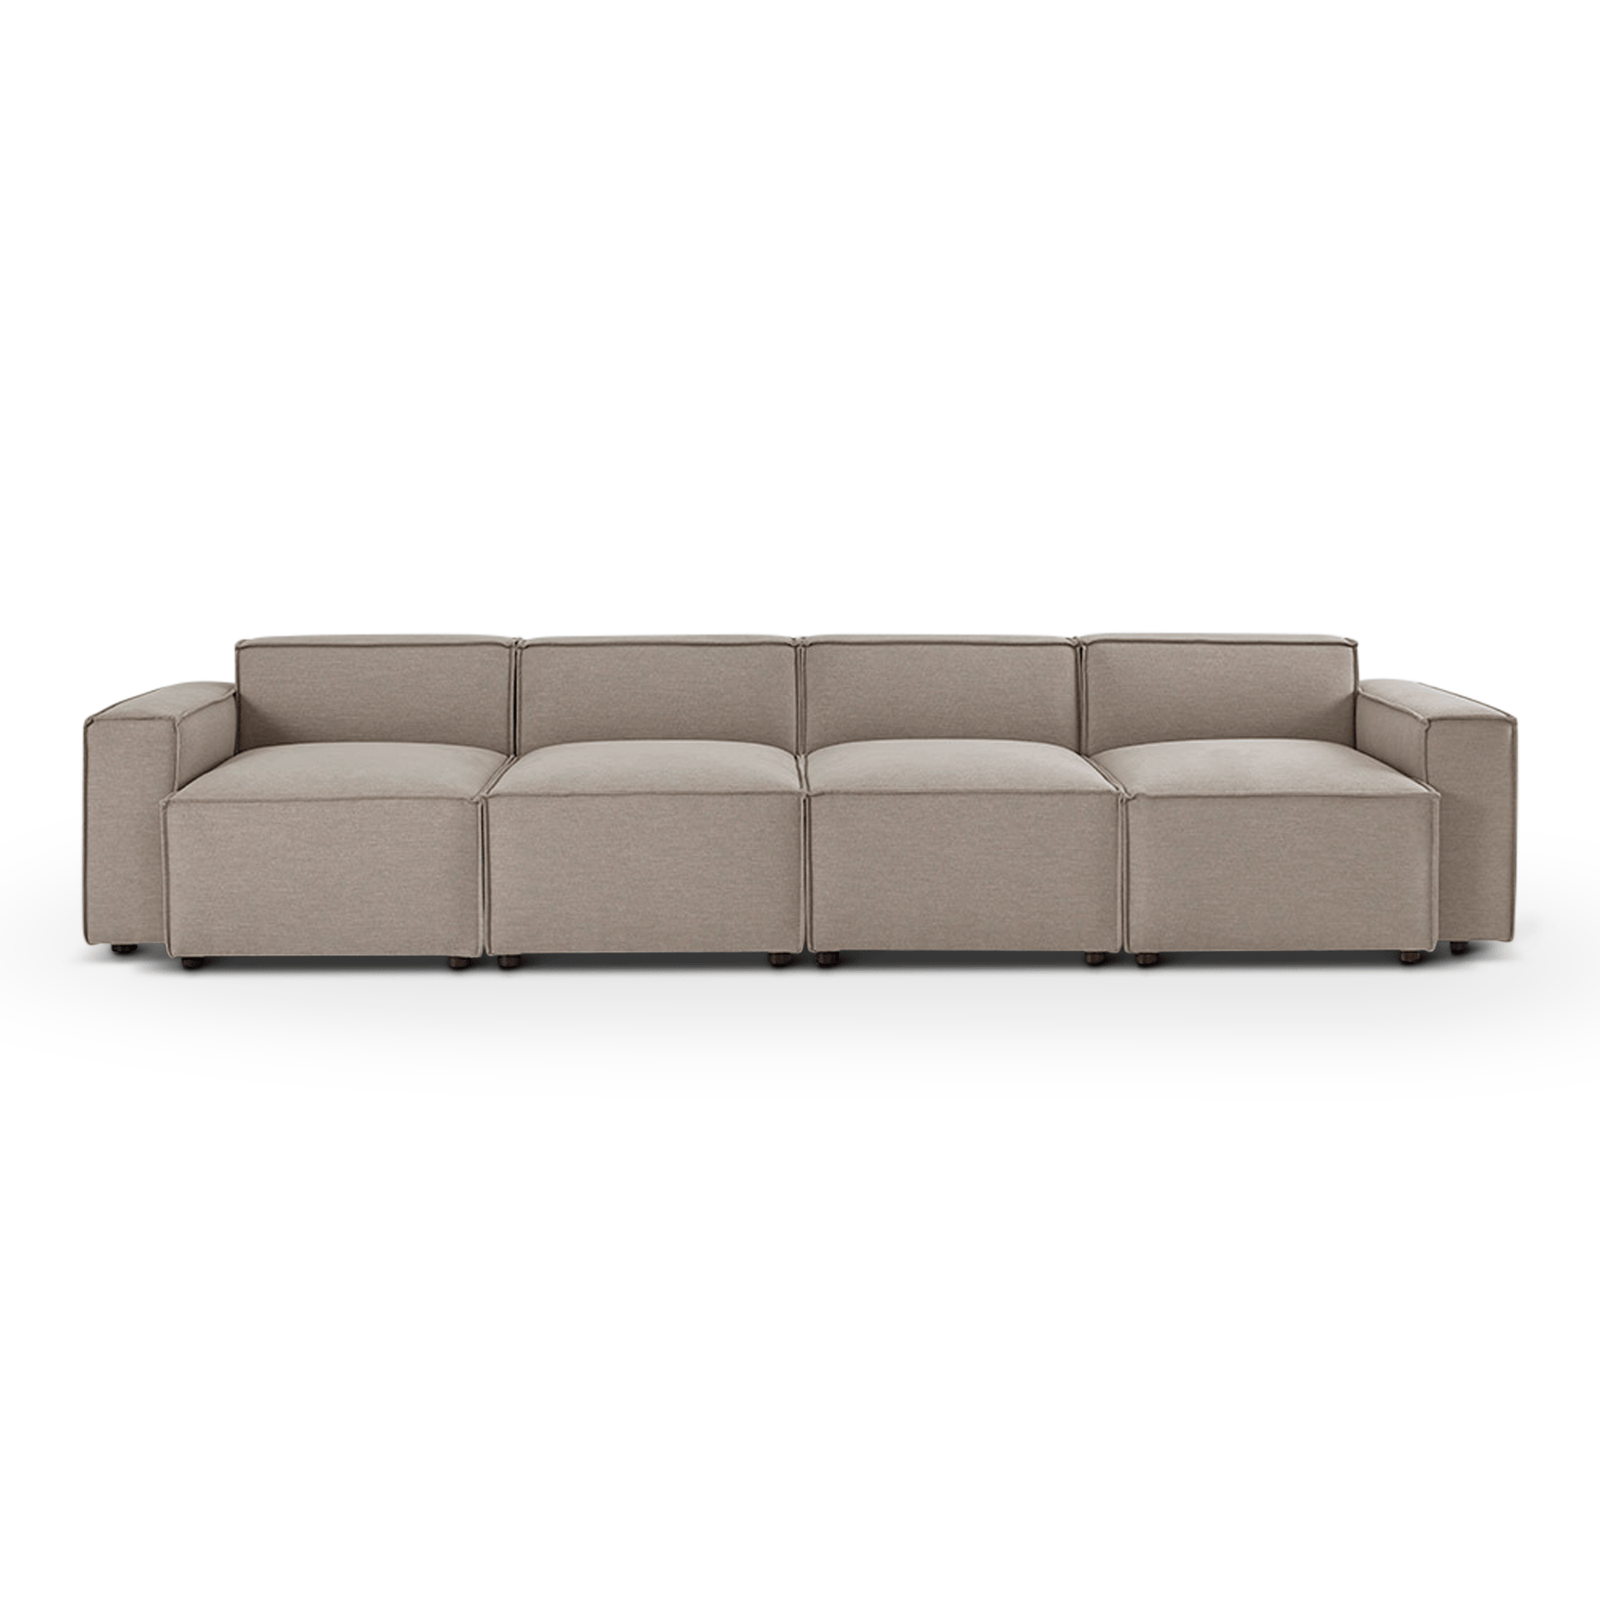 Swyft Model 03 4 Seater Sofa - 48HR DELIVERY